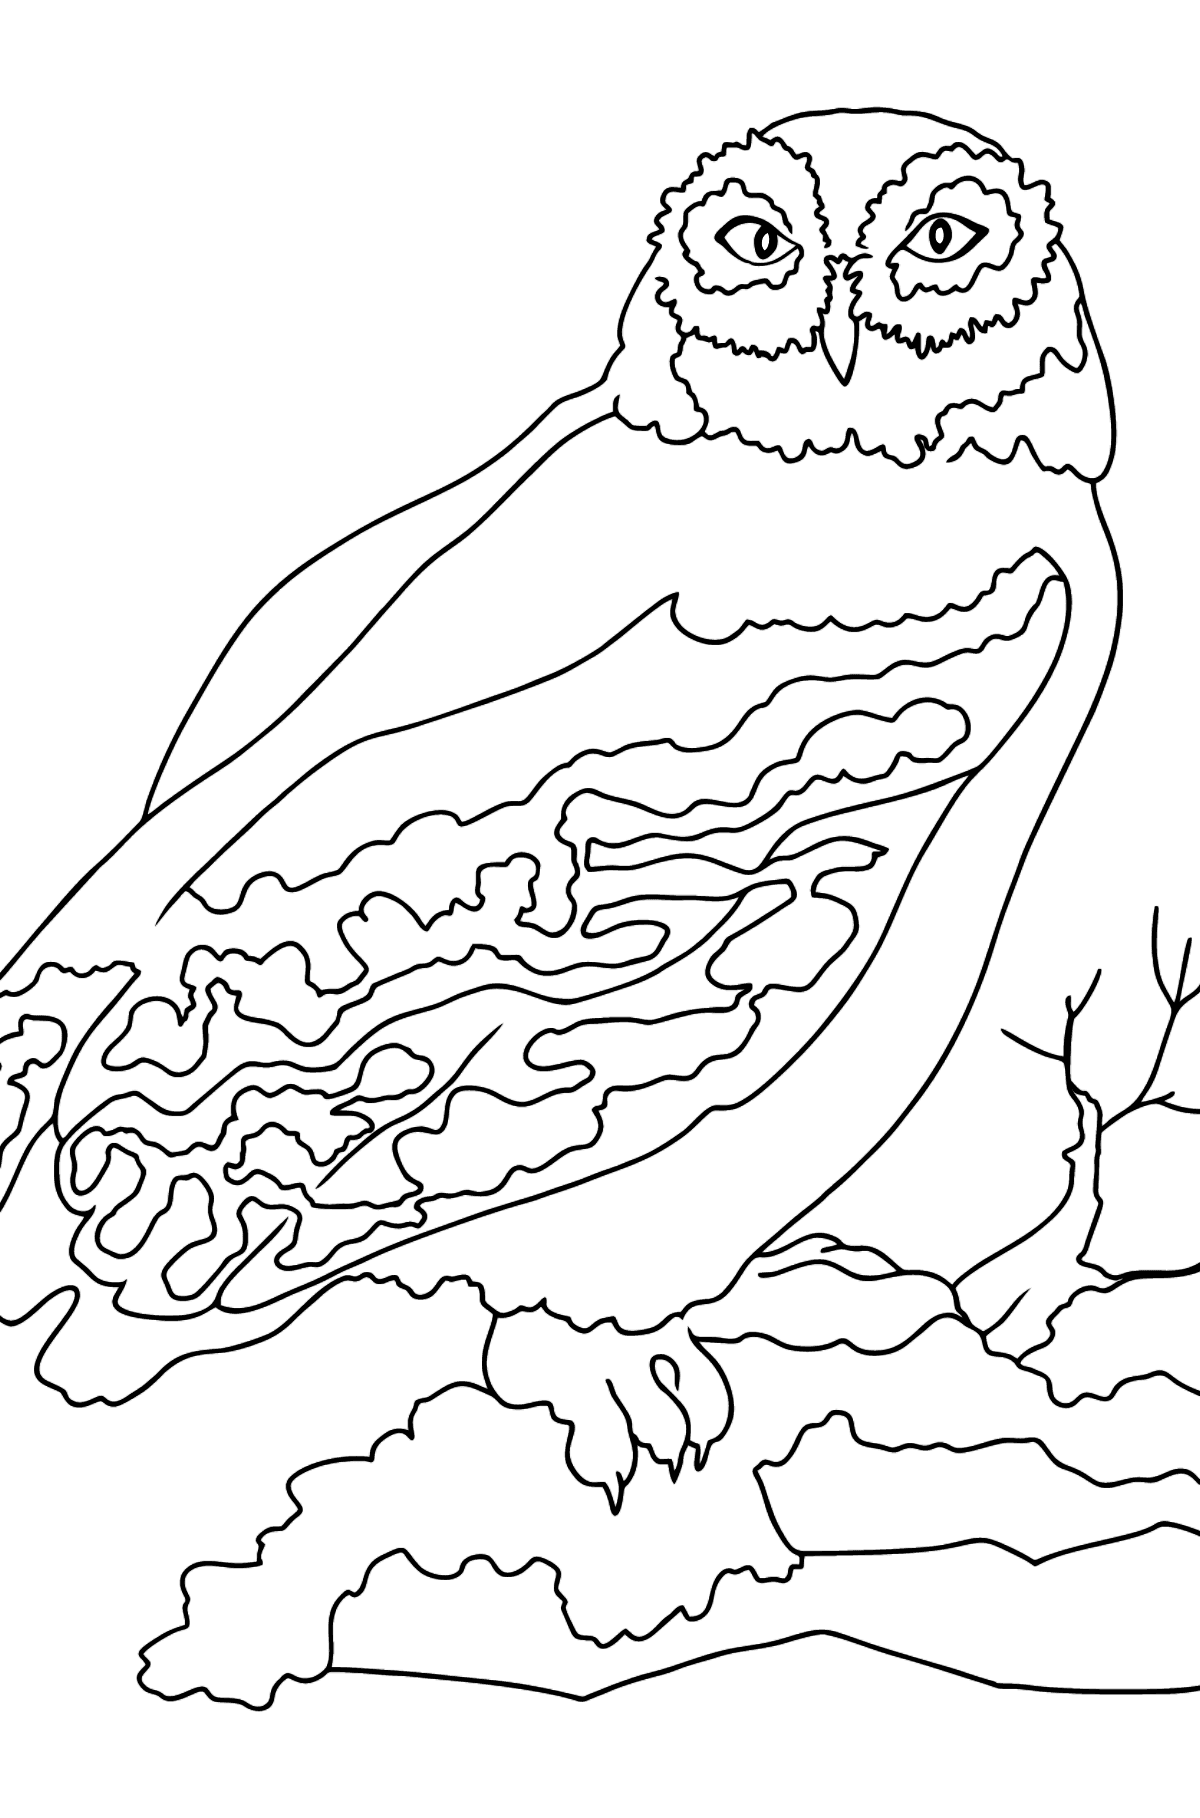 Coloring Page - An Owl - A Nocturnal Predator - Coloring Pages for Kids